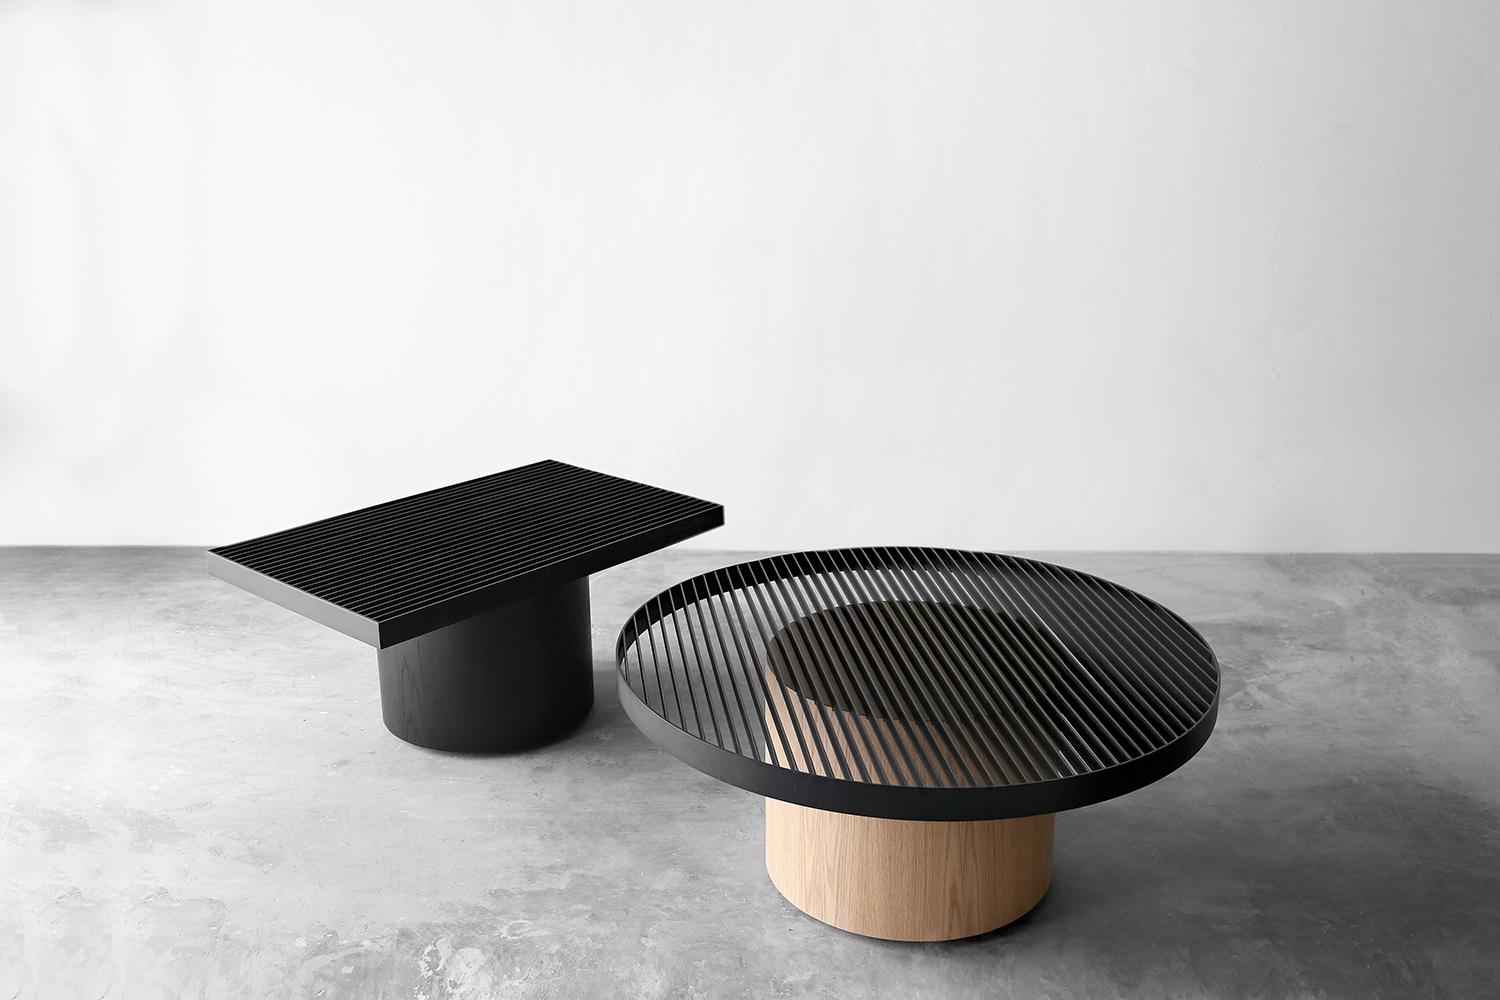 Laws of Motion Round Coffee Table in Oak and Metal Finish by Joel Escalona
 
Laws of Motion is a furniture collection that through a series of different typologies explores concepts like force, gravity and movement. Each of these functional